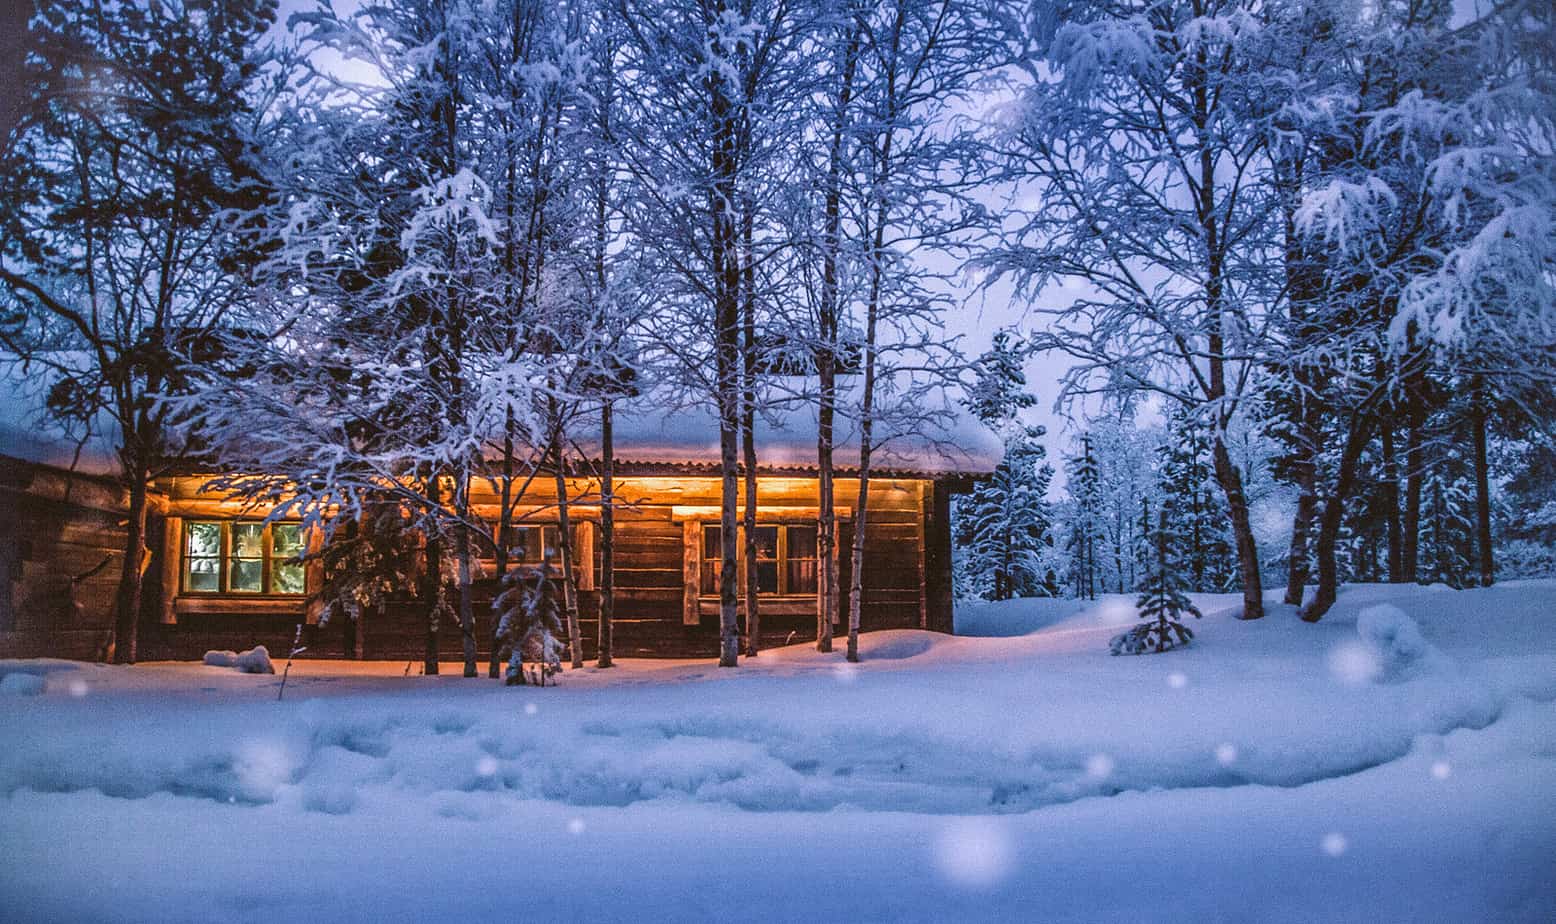 One of the most romantic cabins in North Carolina in winter time with snow all around